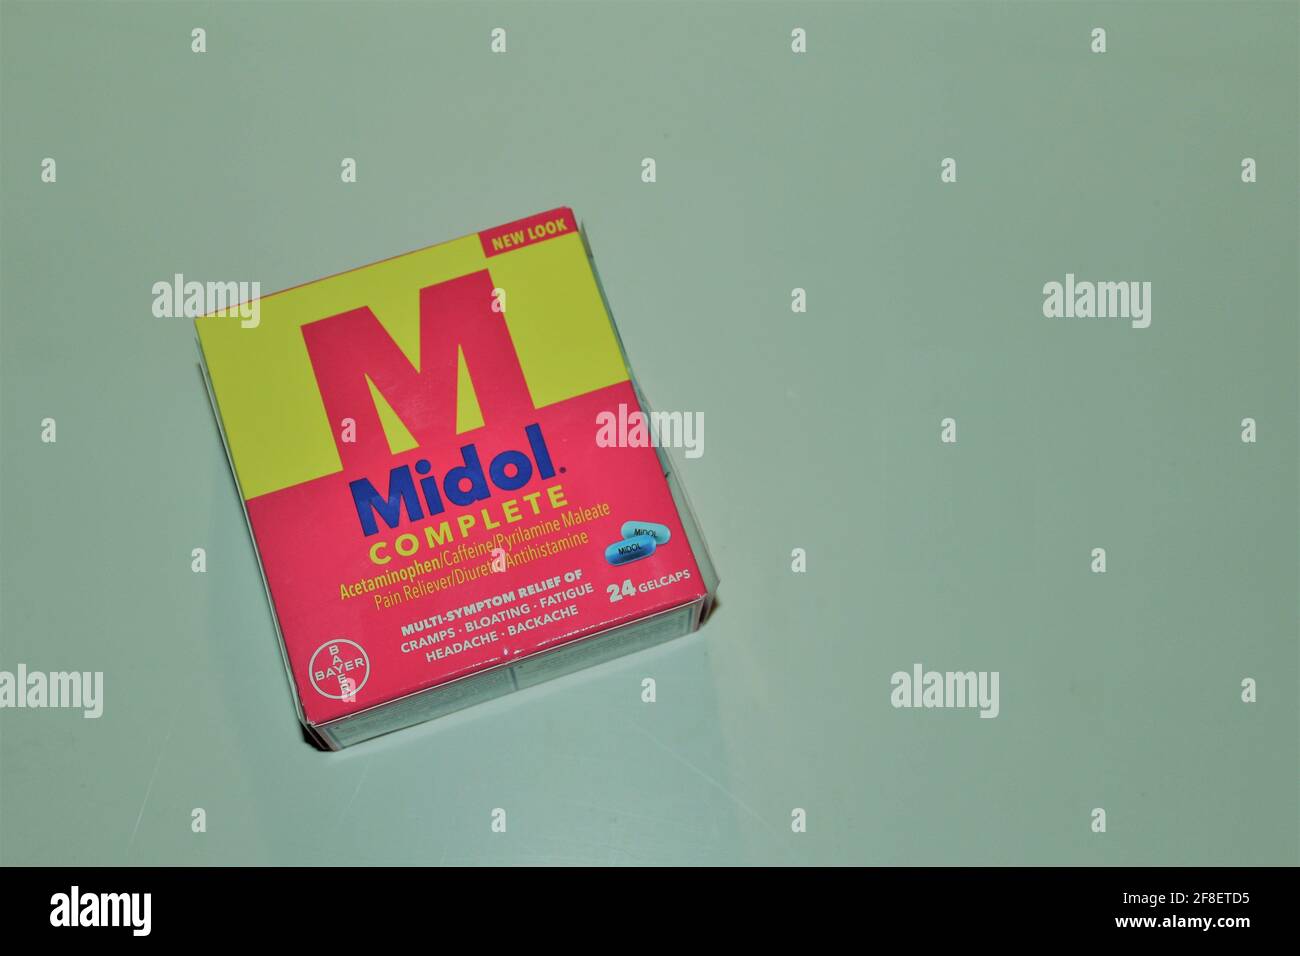 New look retro package of Midol complete medicine for cramps, fatigue and bloating on an isolated background. Stock Photo